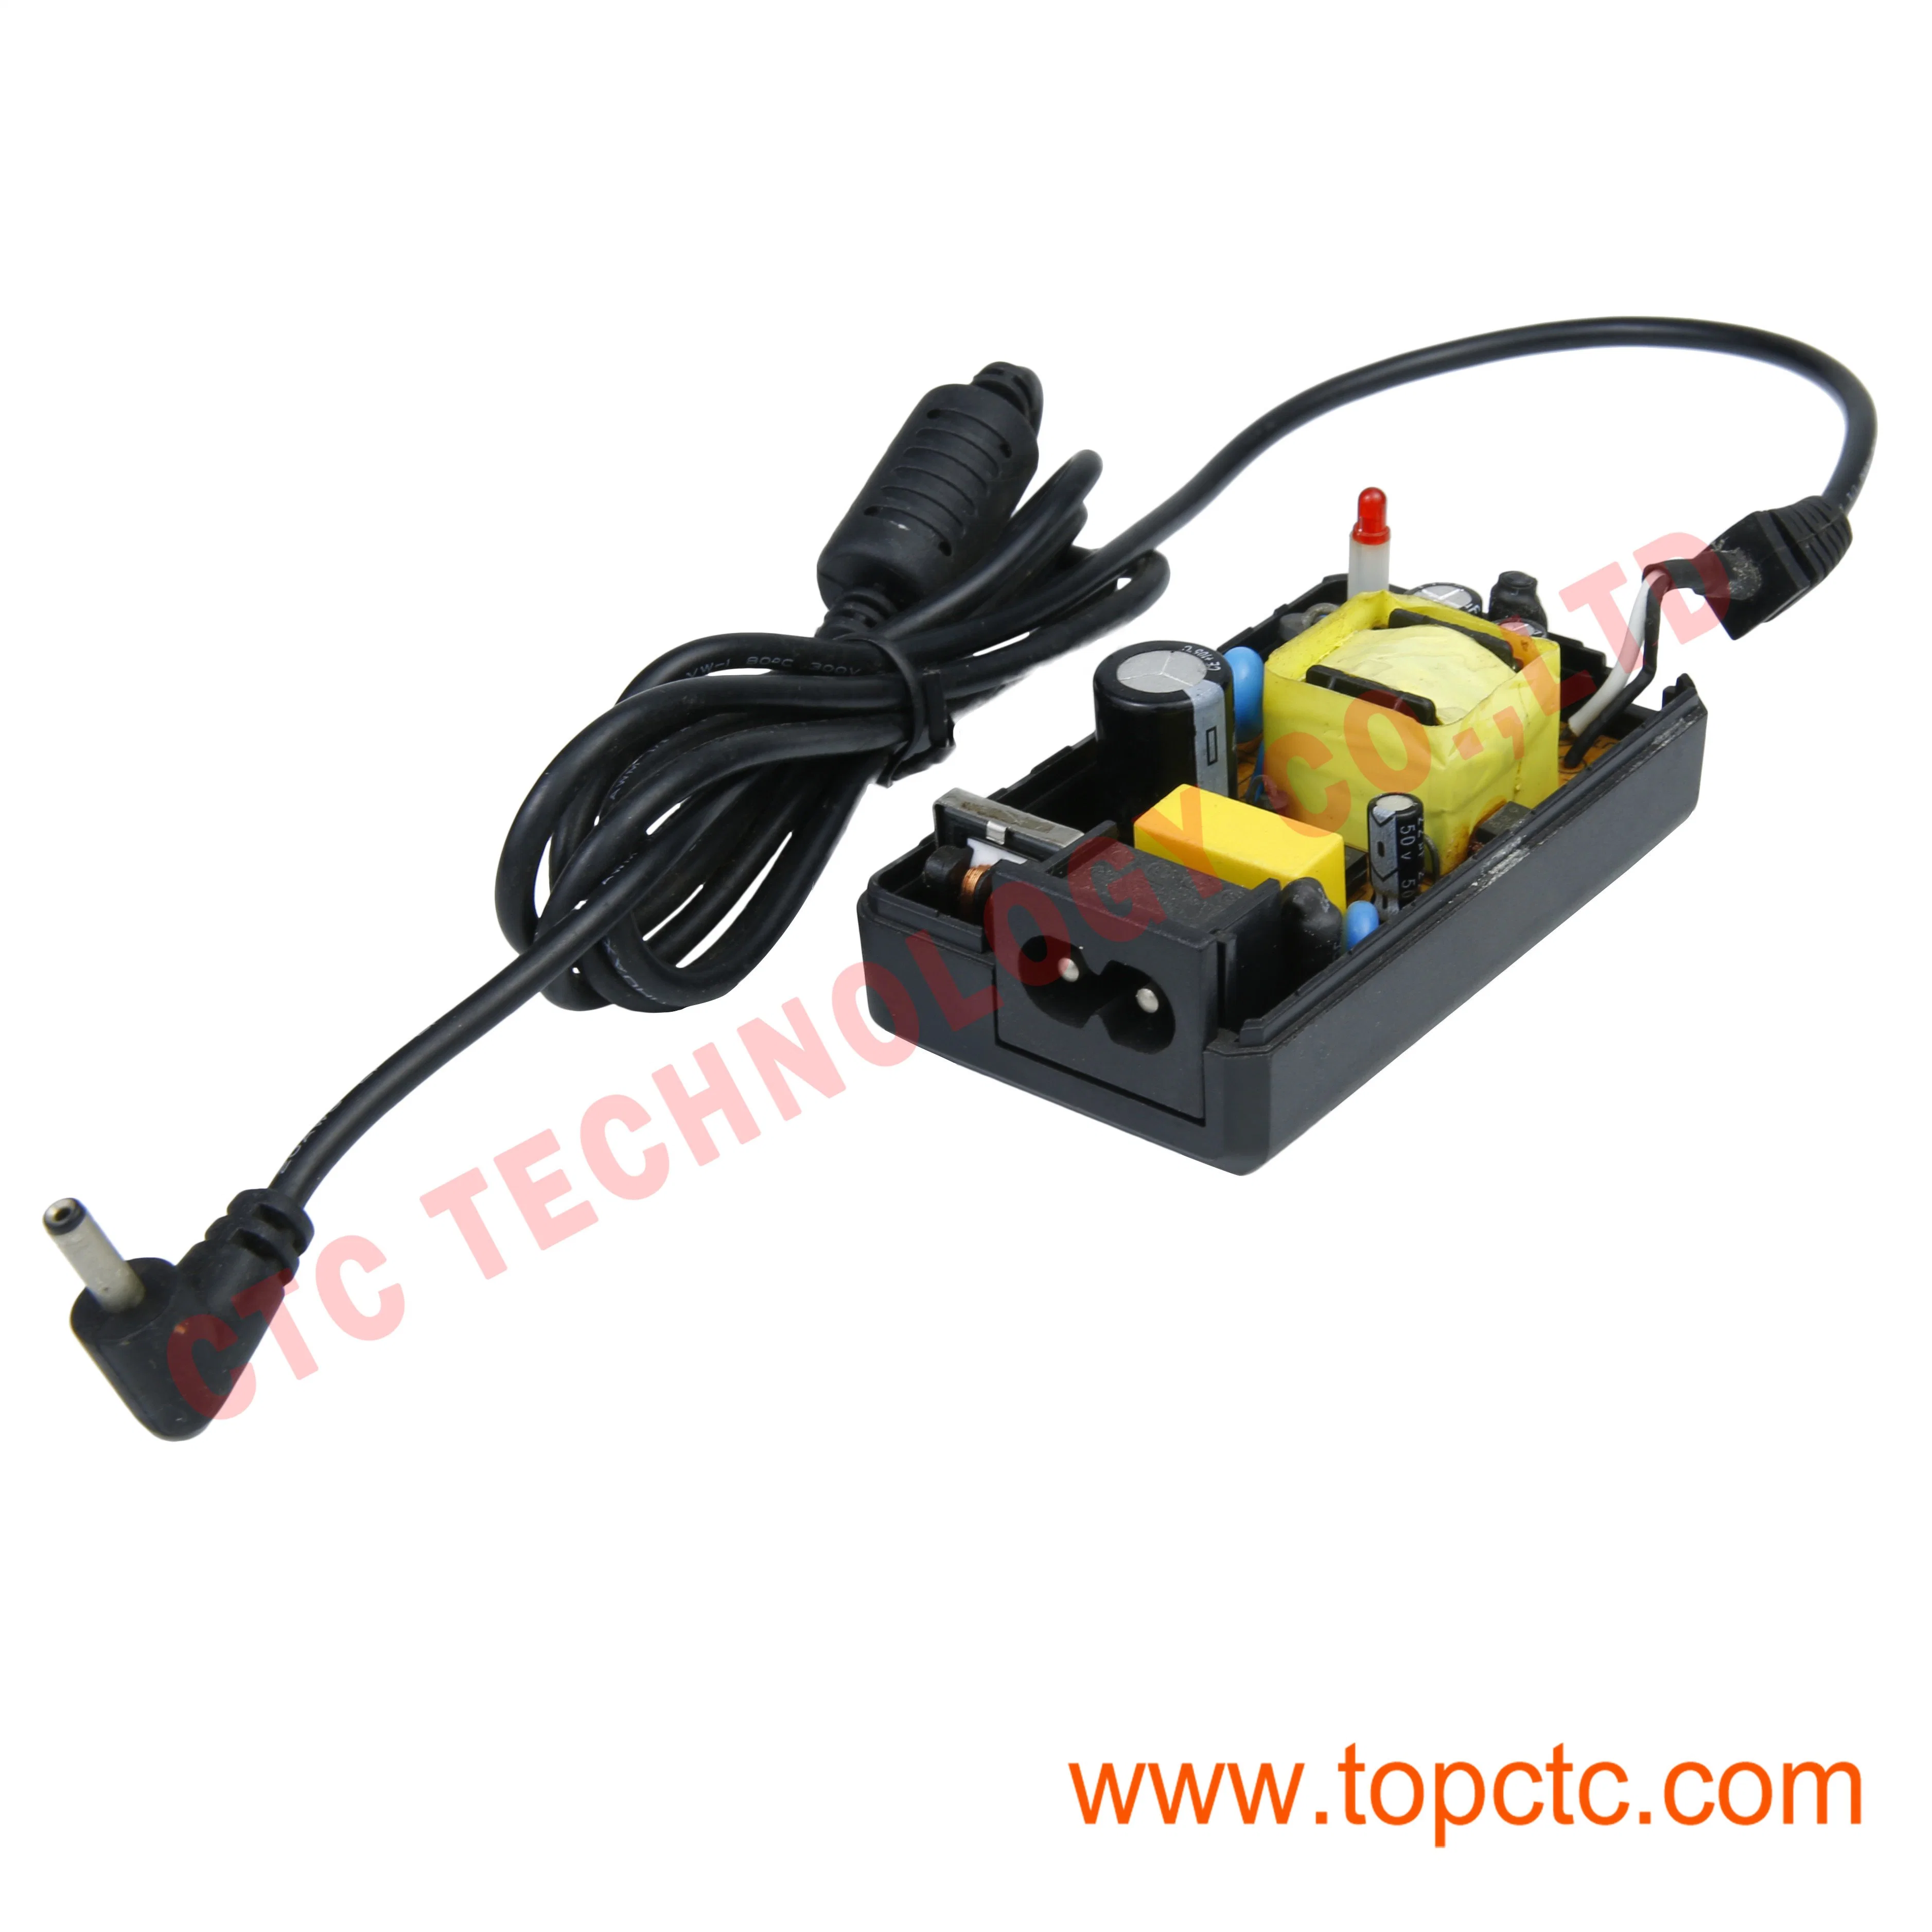 Adaper Charger Consumer ELectronic Circuit Board PCBA